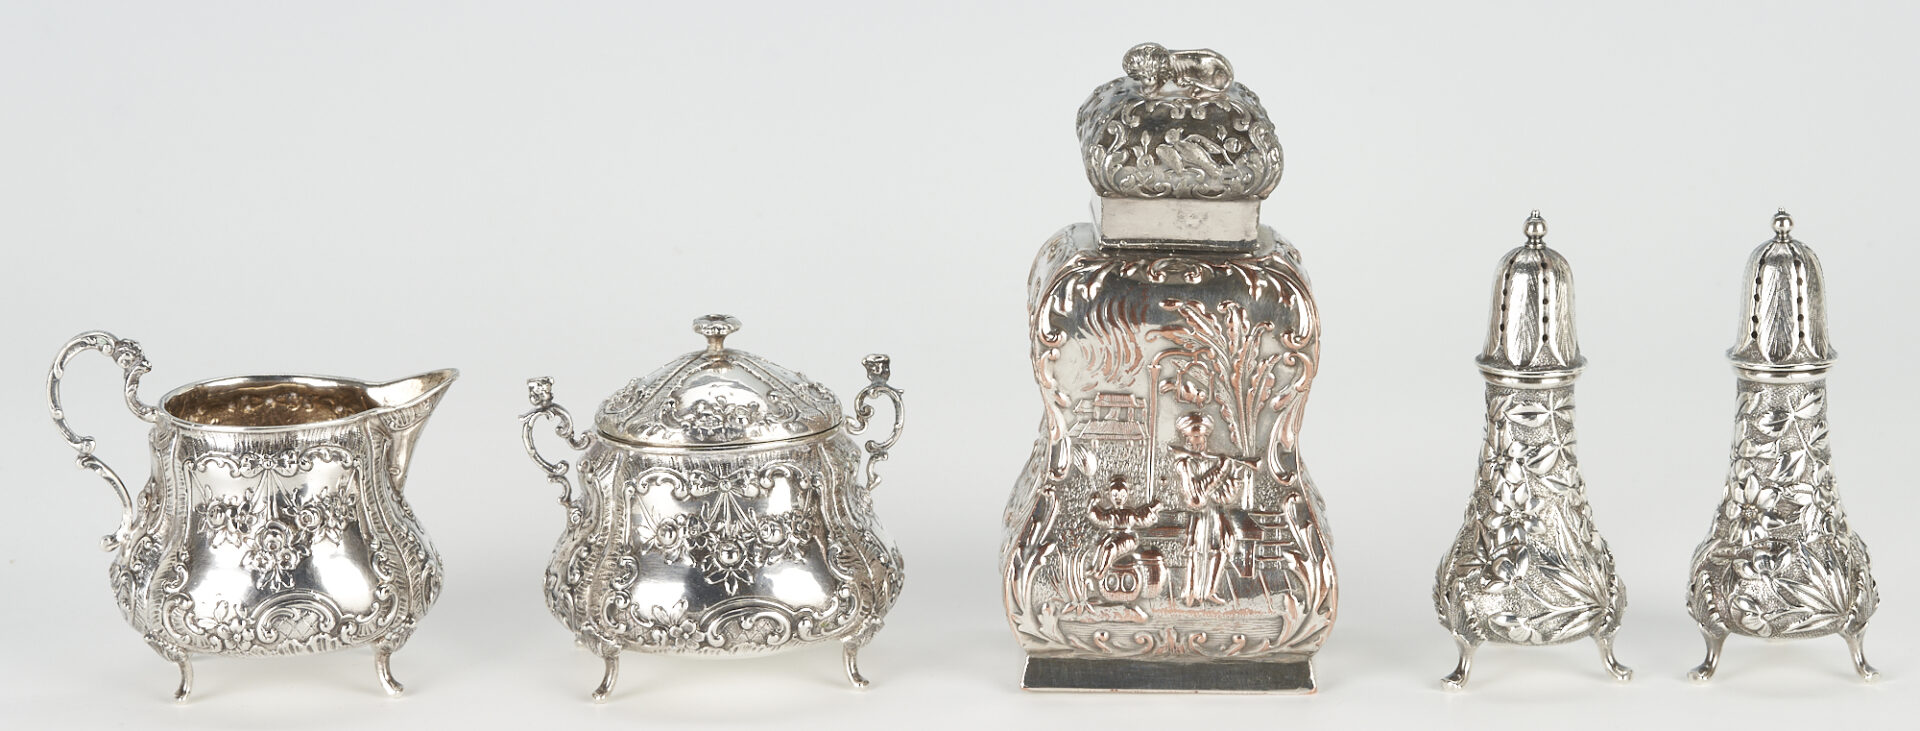 Lot 729: 8 pcs. assorted Silver Holloware incl. Chinoiserie Tea Caddy